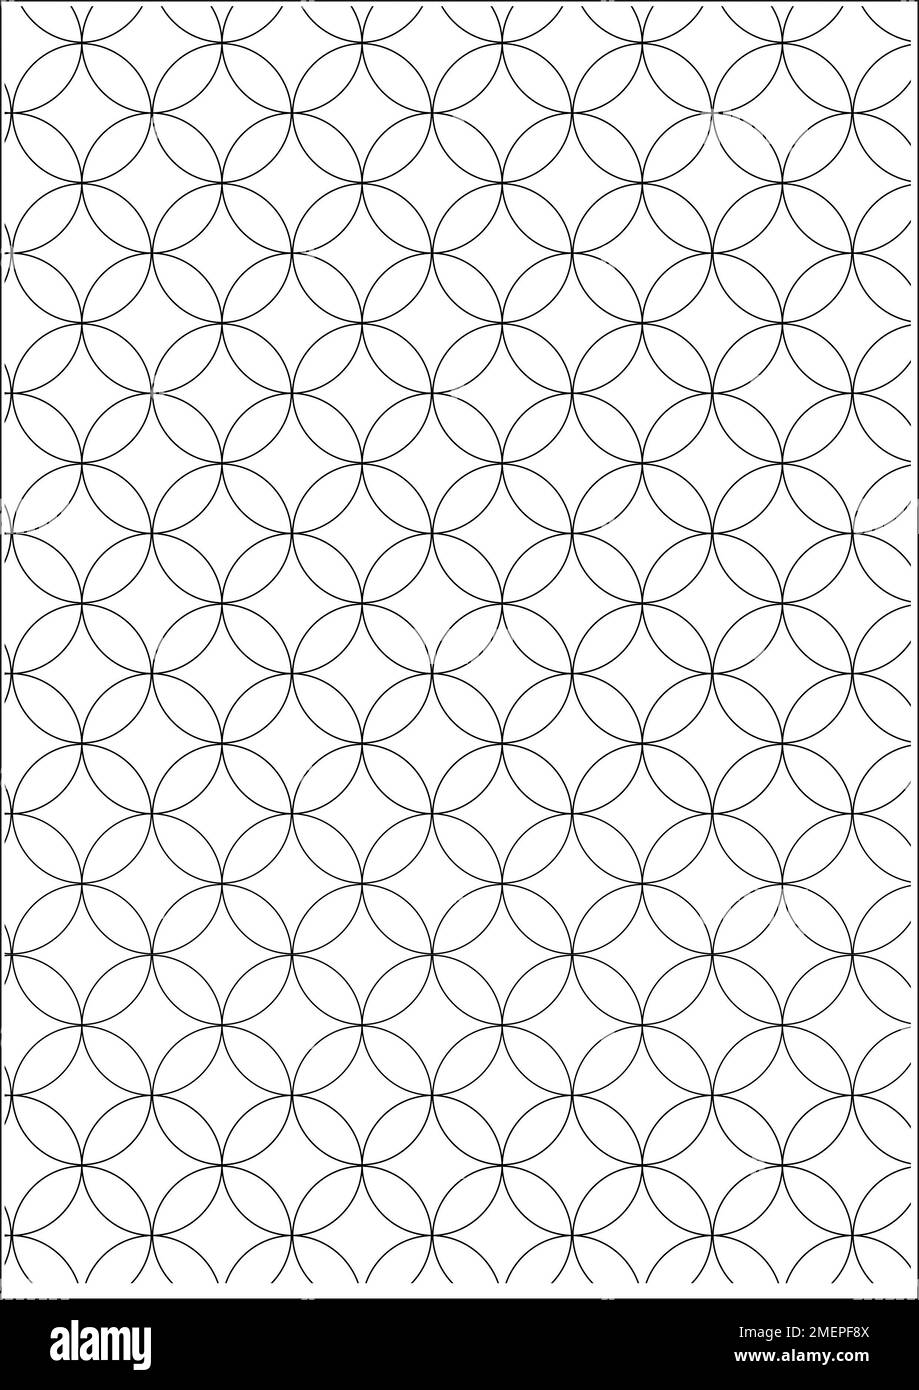 Background pattern with overlapping circles Stock Photo